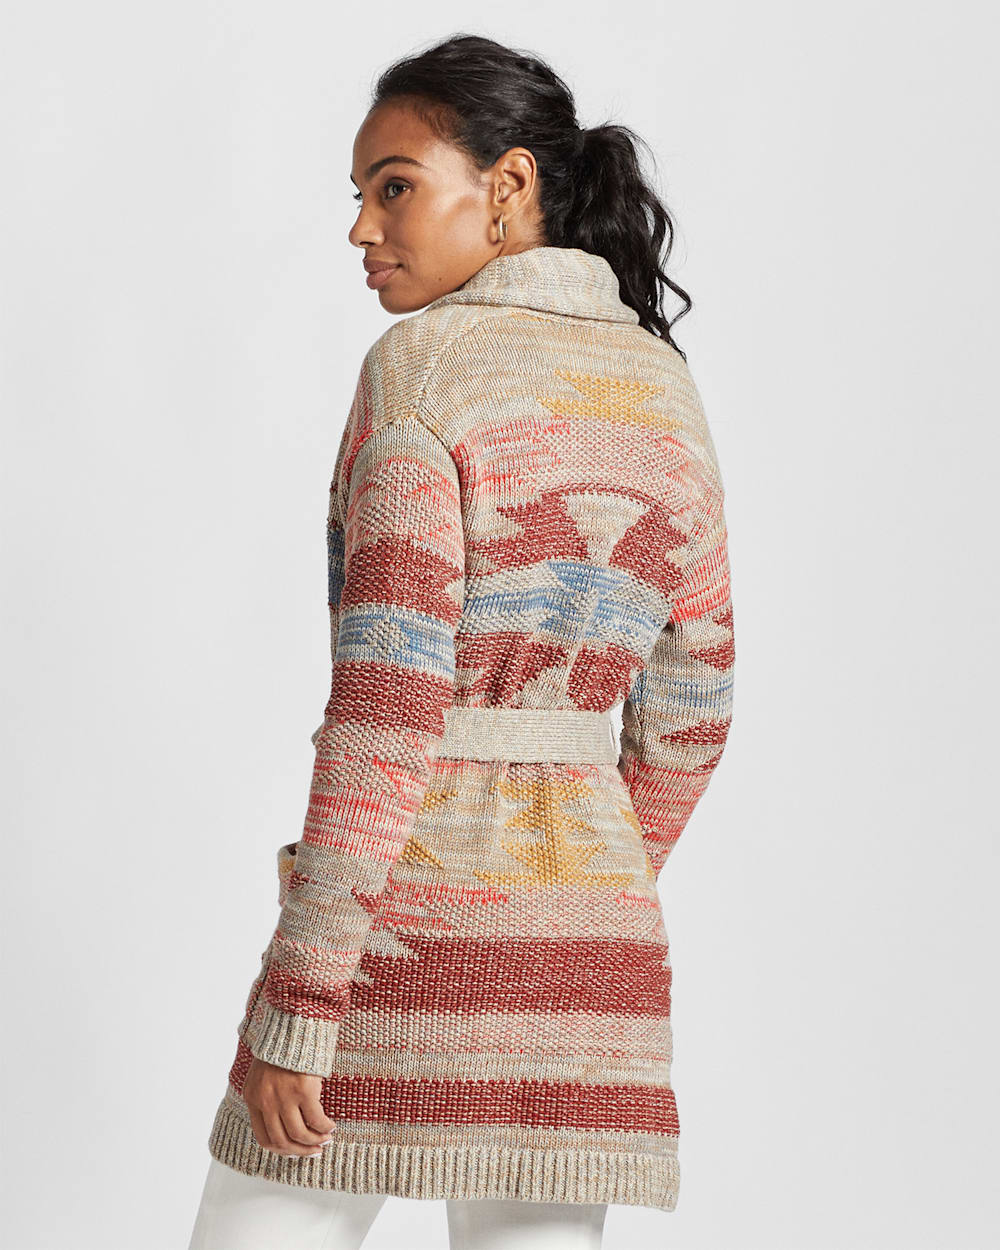 ALTERNATE VIEW OF WOMEN'S MONTEREY BELTED COTTON CARDIGAN IN TAUPE MULTI image number 3